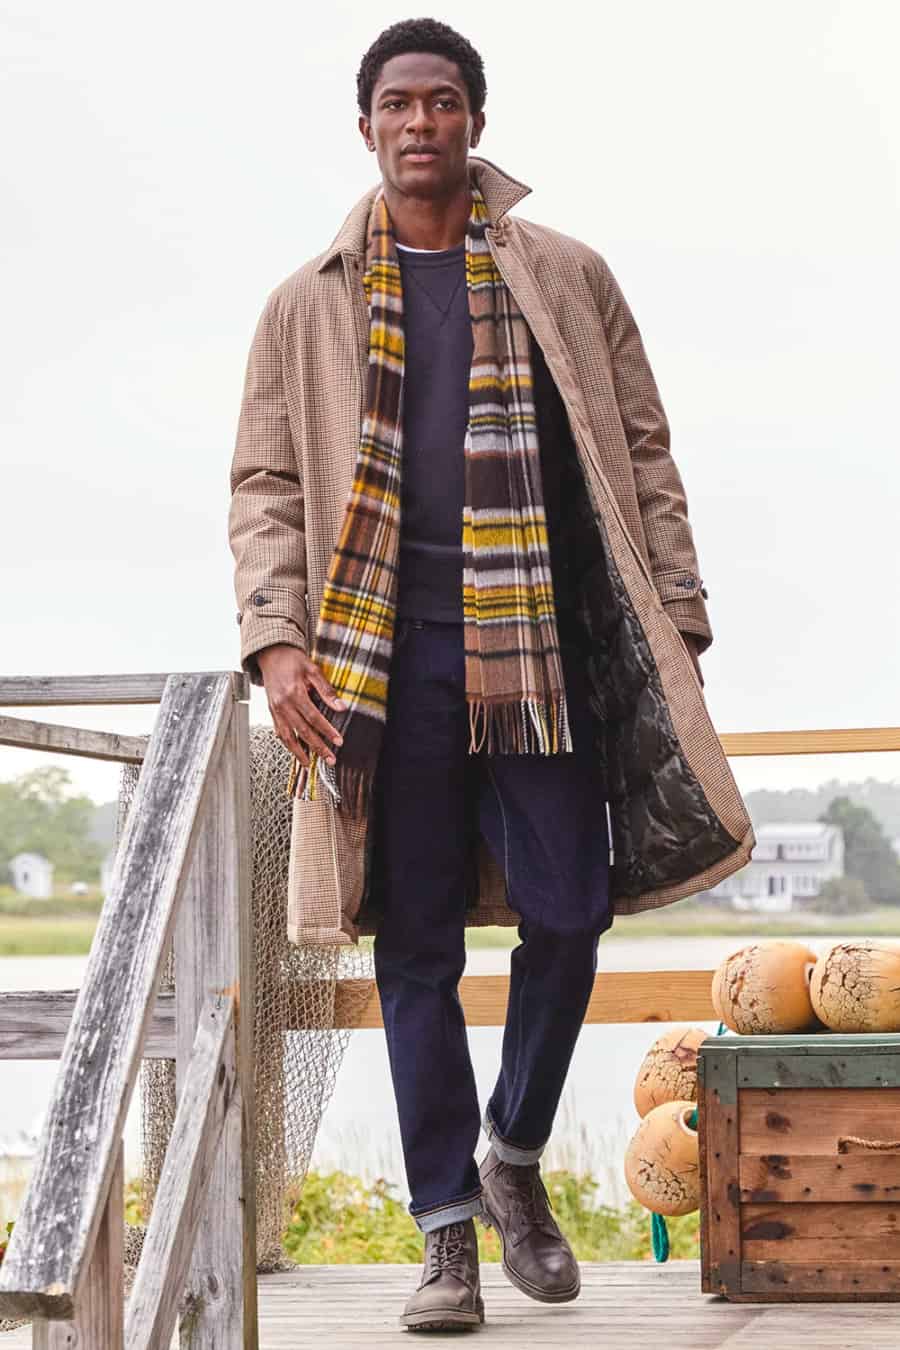 Men's raw denim jeans, navy sweatshirt, beige rain coat, brown boots and yellow checked scarf outfit